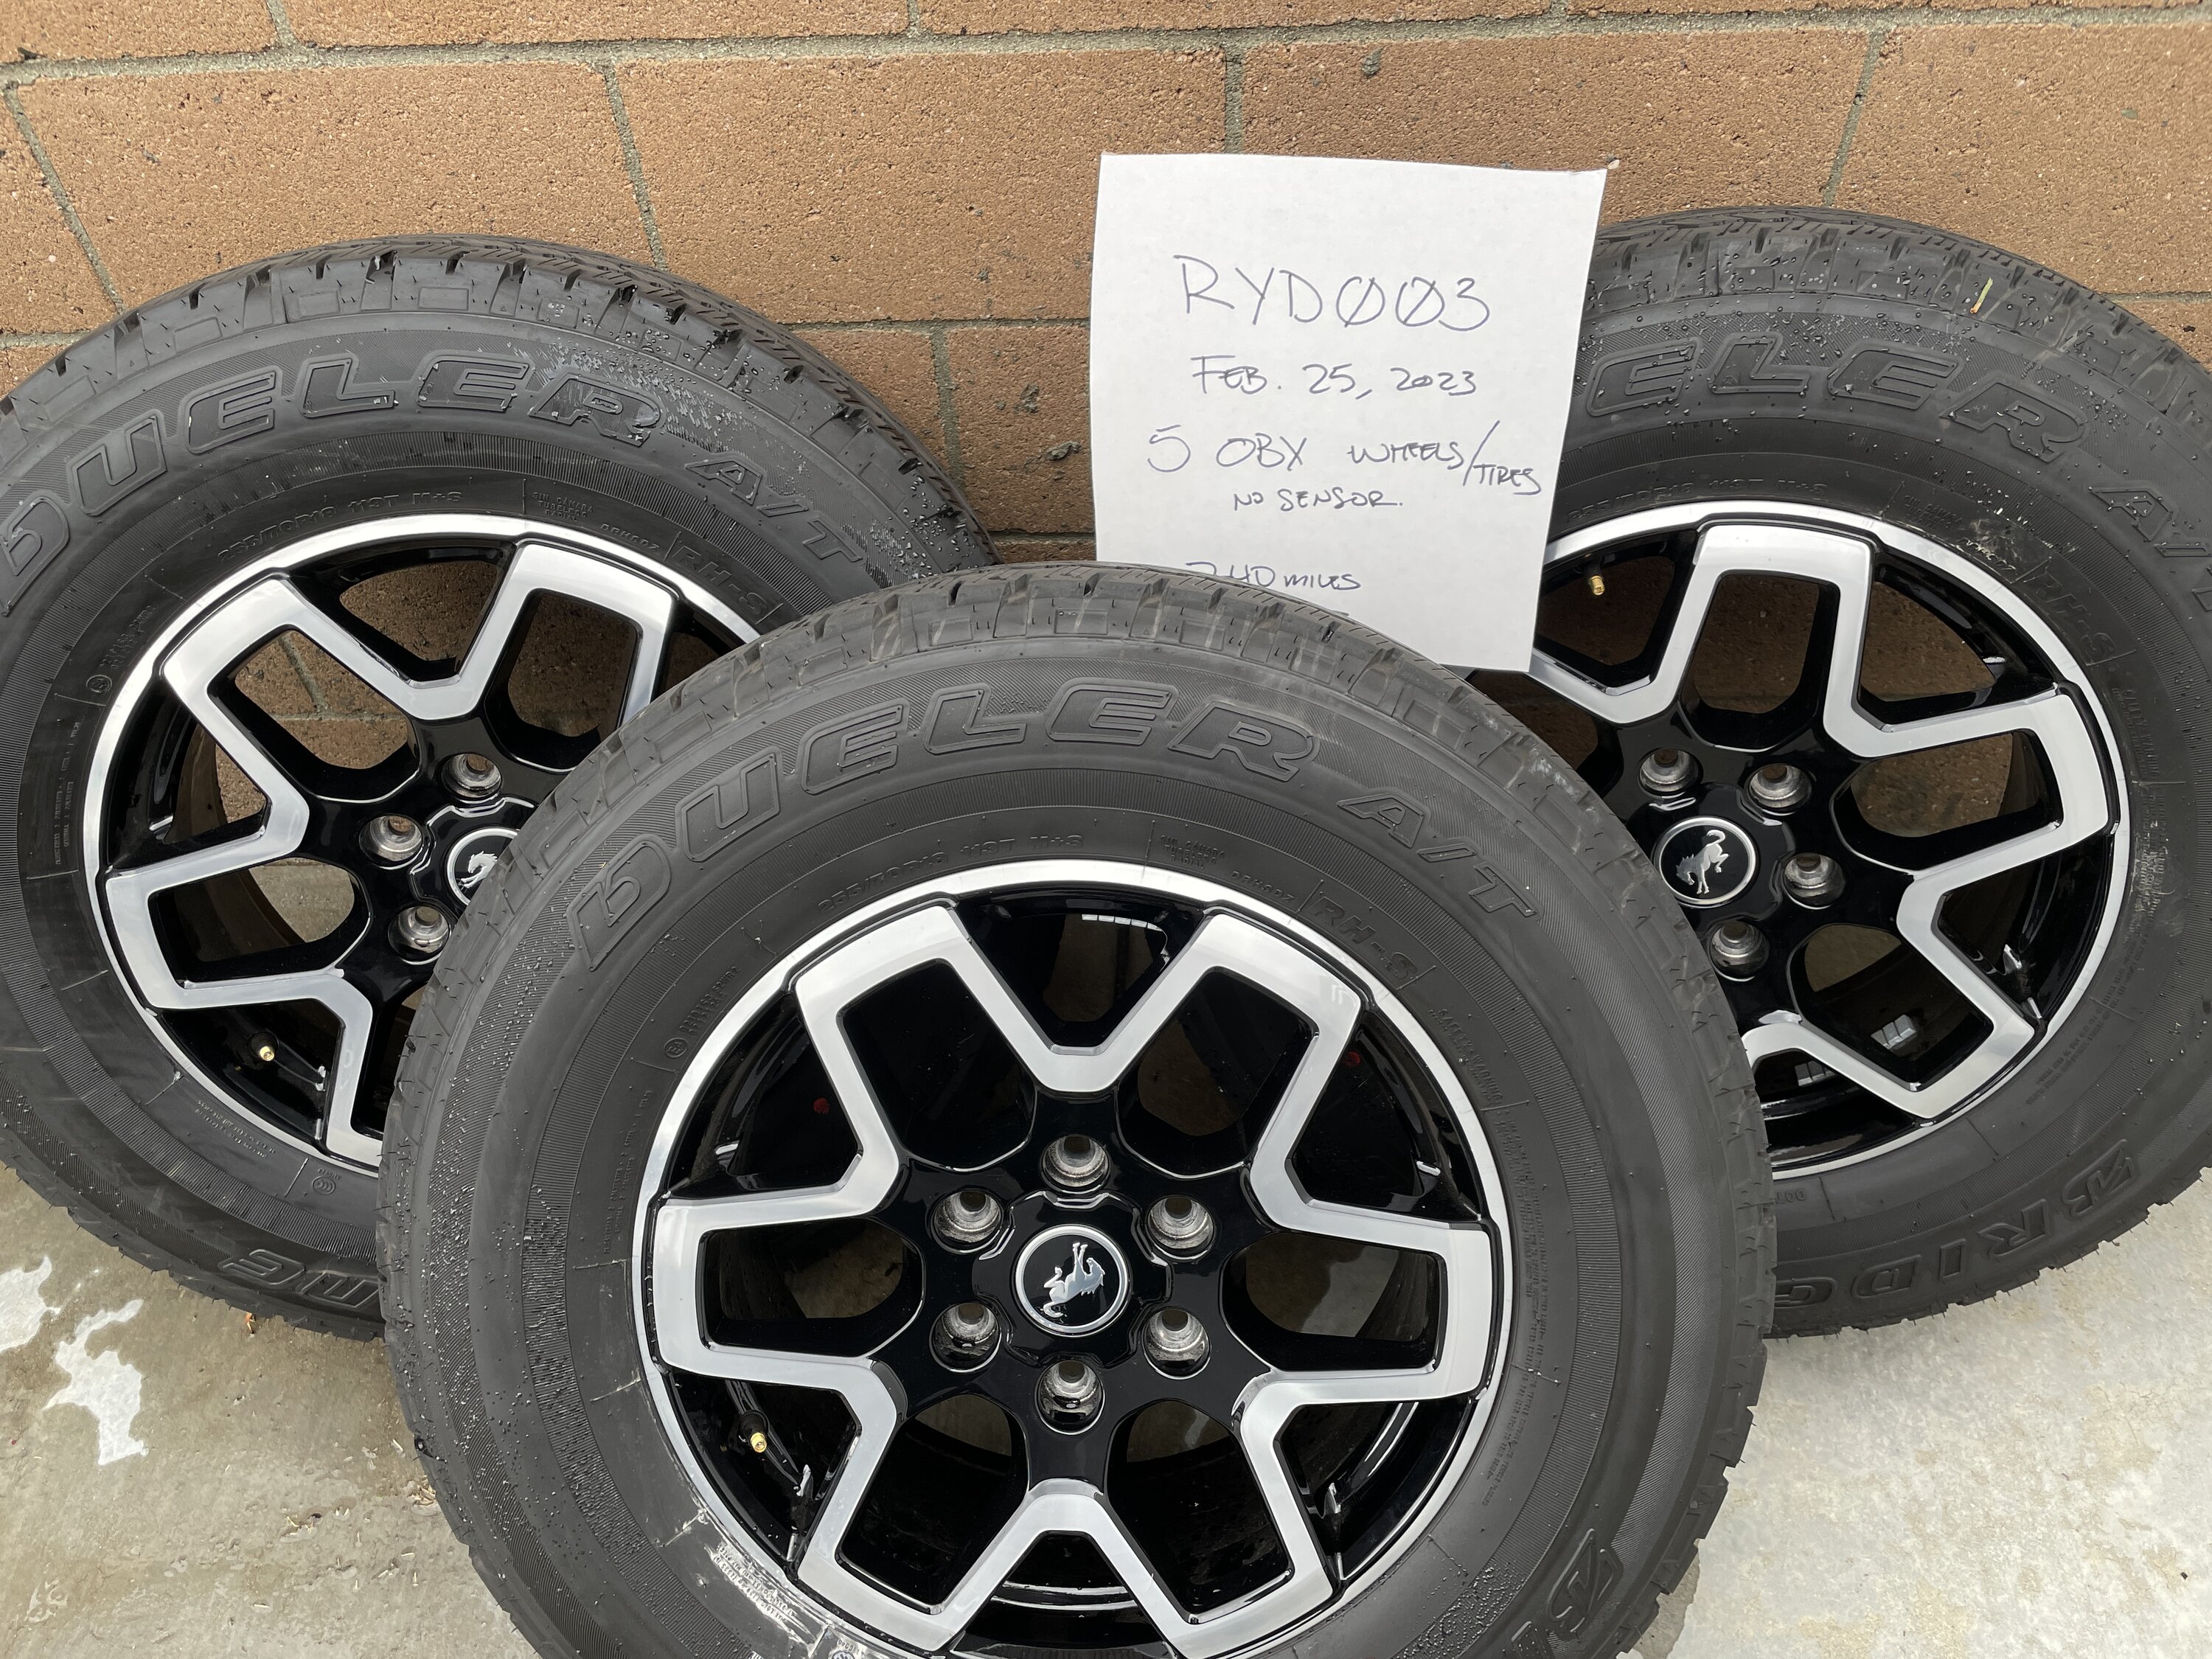 Ford Bronco SOLD - FS 5 OBX Wheels/tires/center caps/lug nuts - no sensors - local pickup only. $750 OBO 27967479-FB54-4E97-B8F5-16D1FEE1277F